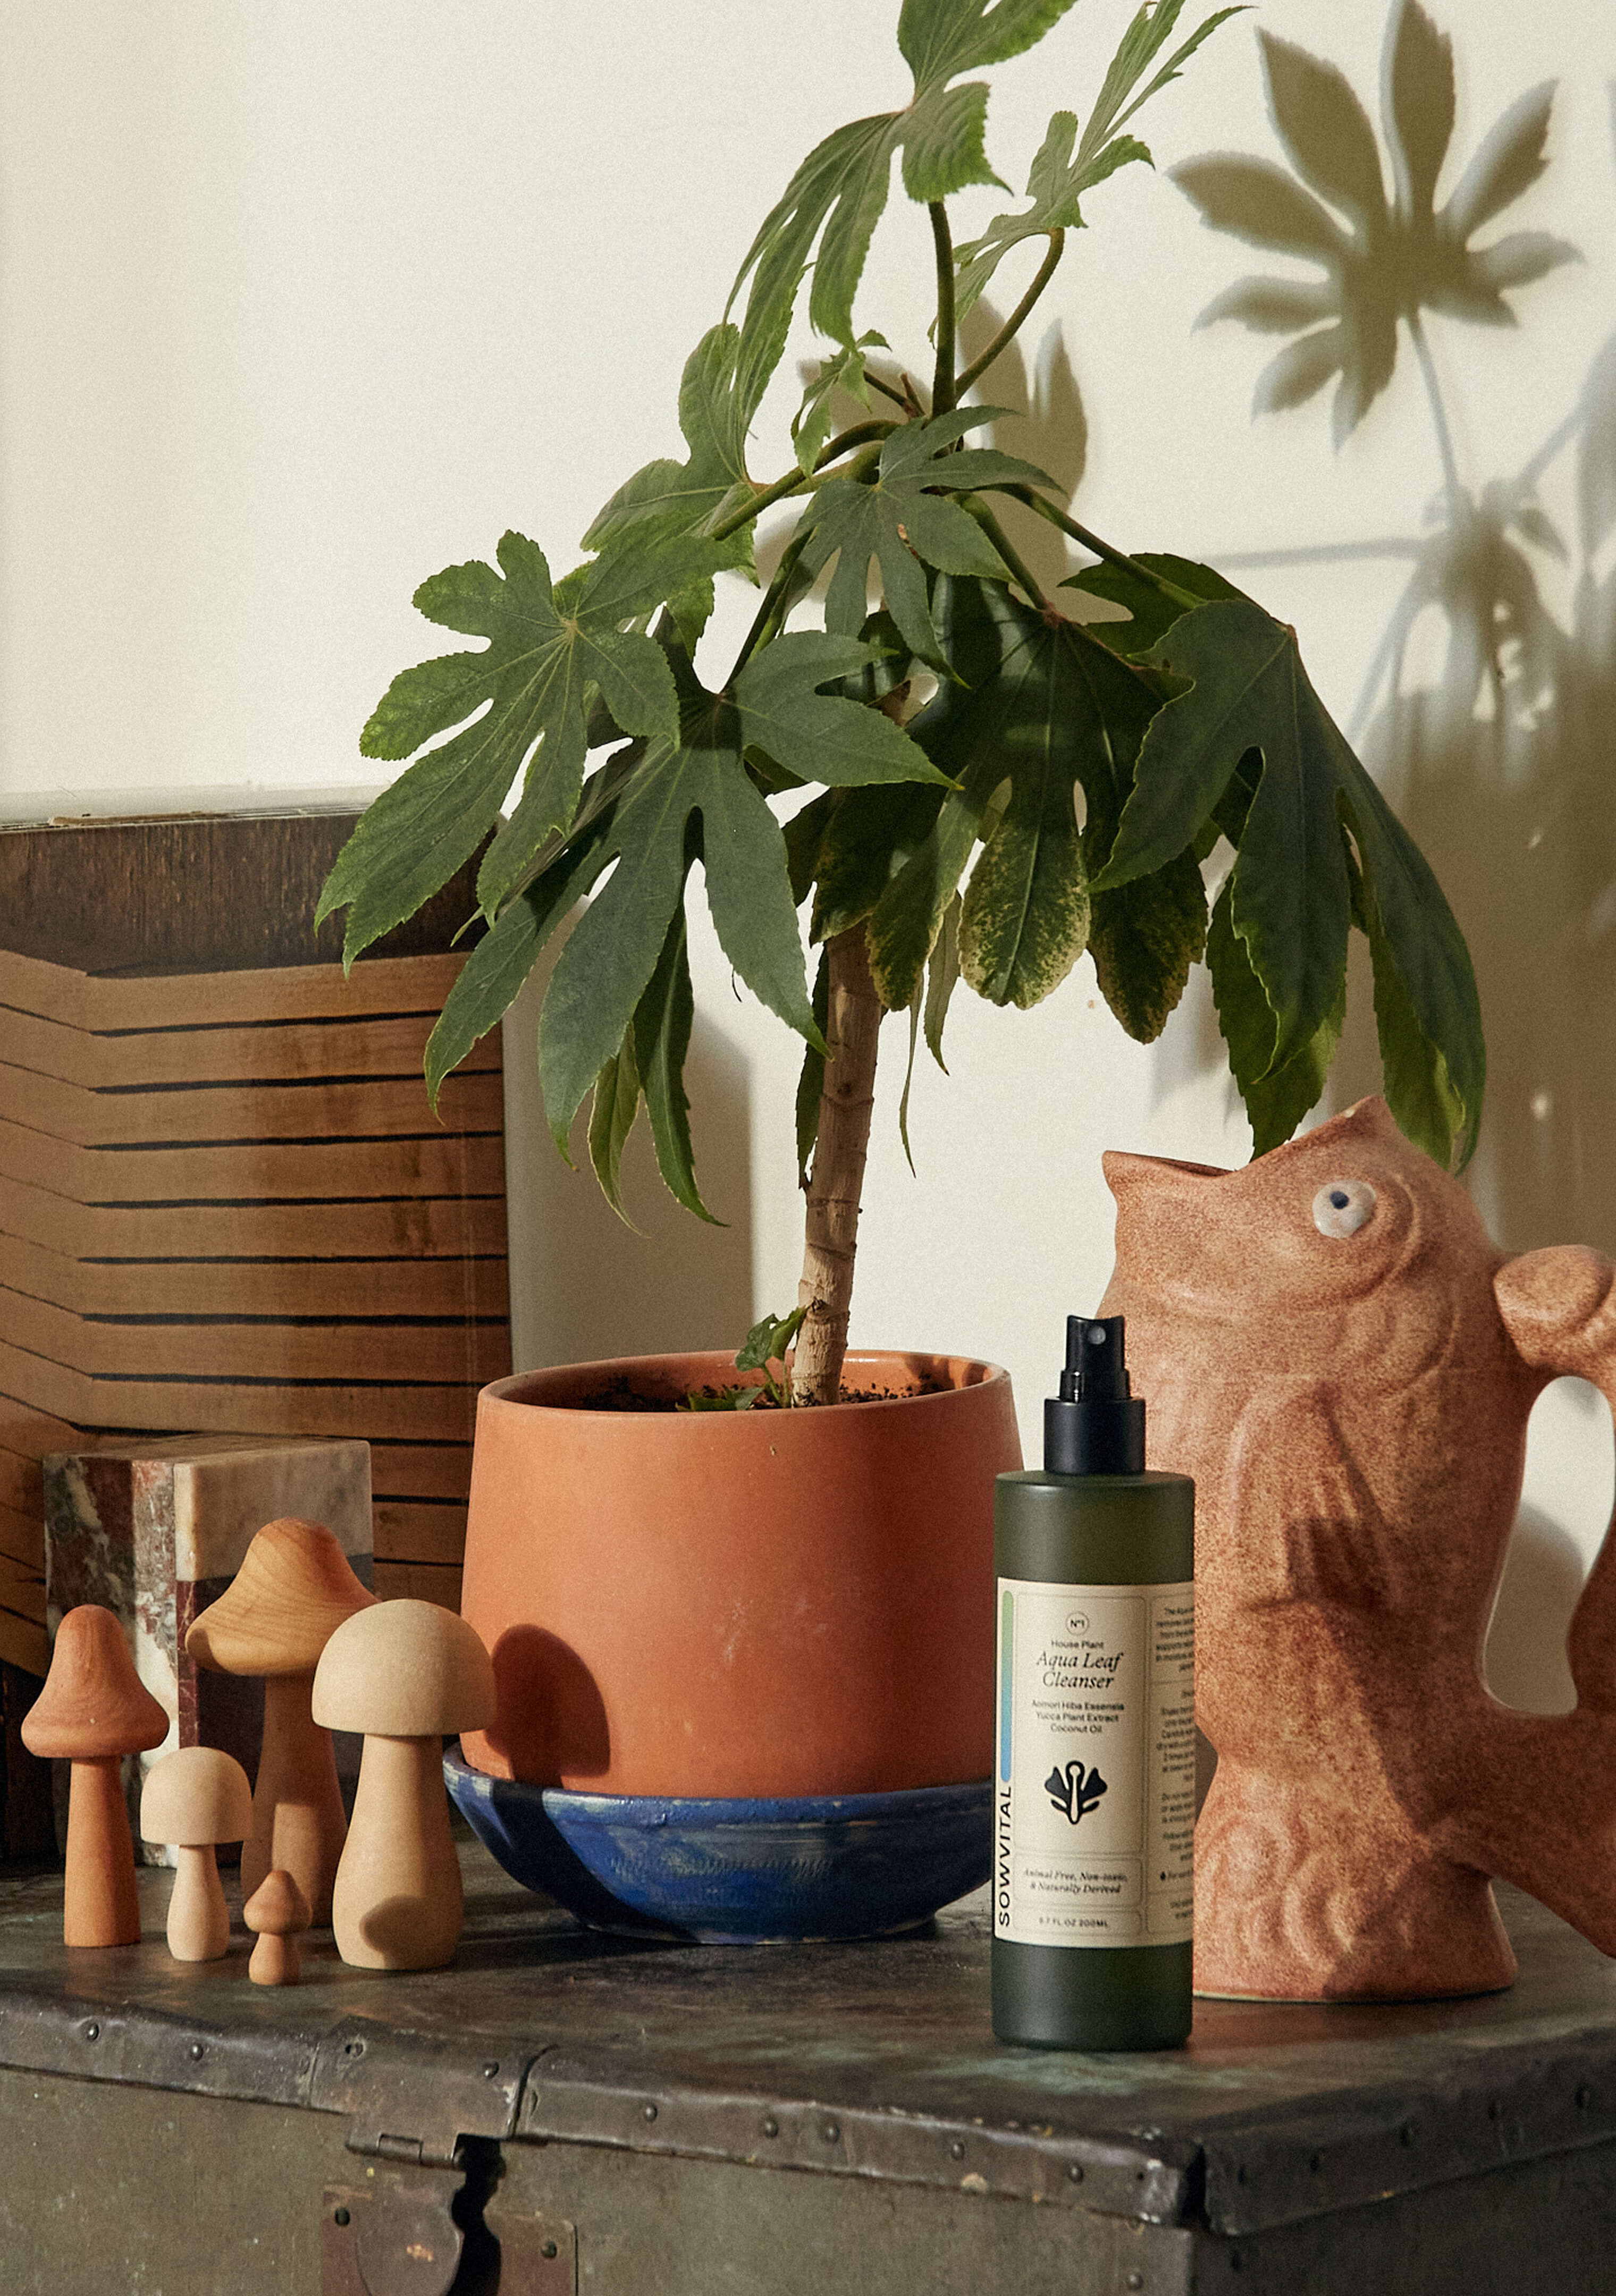 Sowvital aqua leaf cleanser sitting on the table next to a opened-mouth fish statue, a potted paperplant and some wooden-made mushroom decorations.